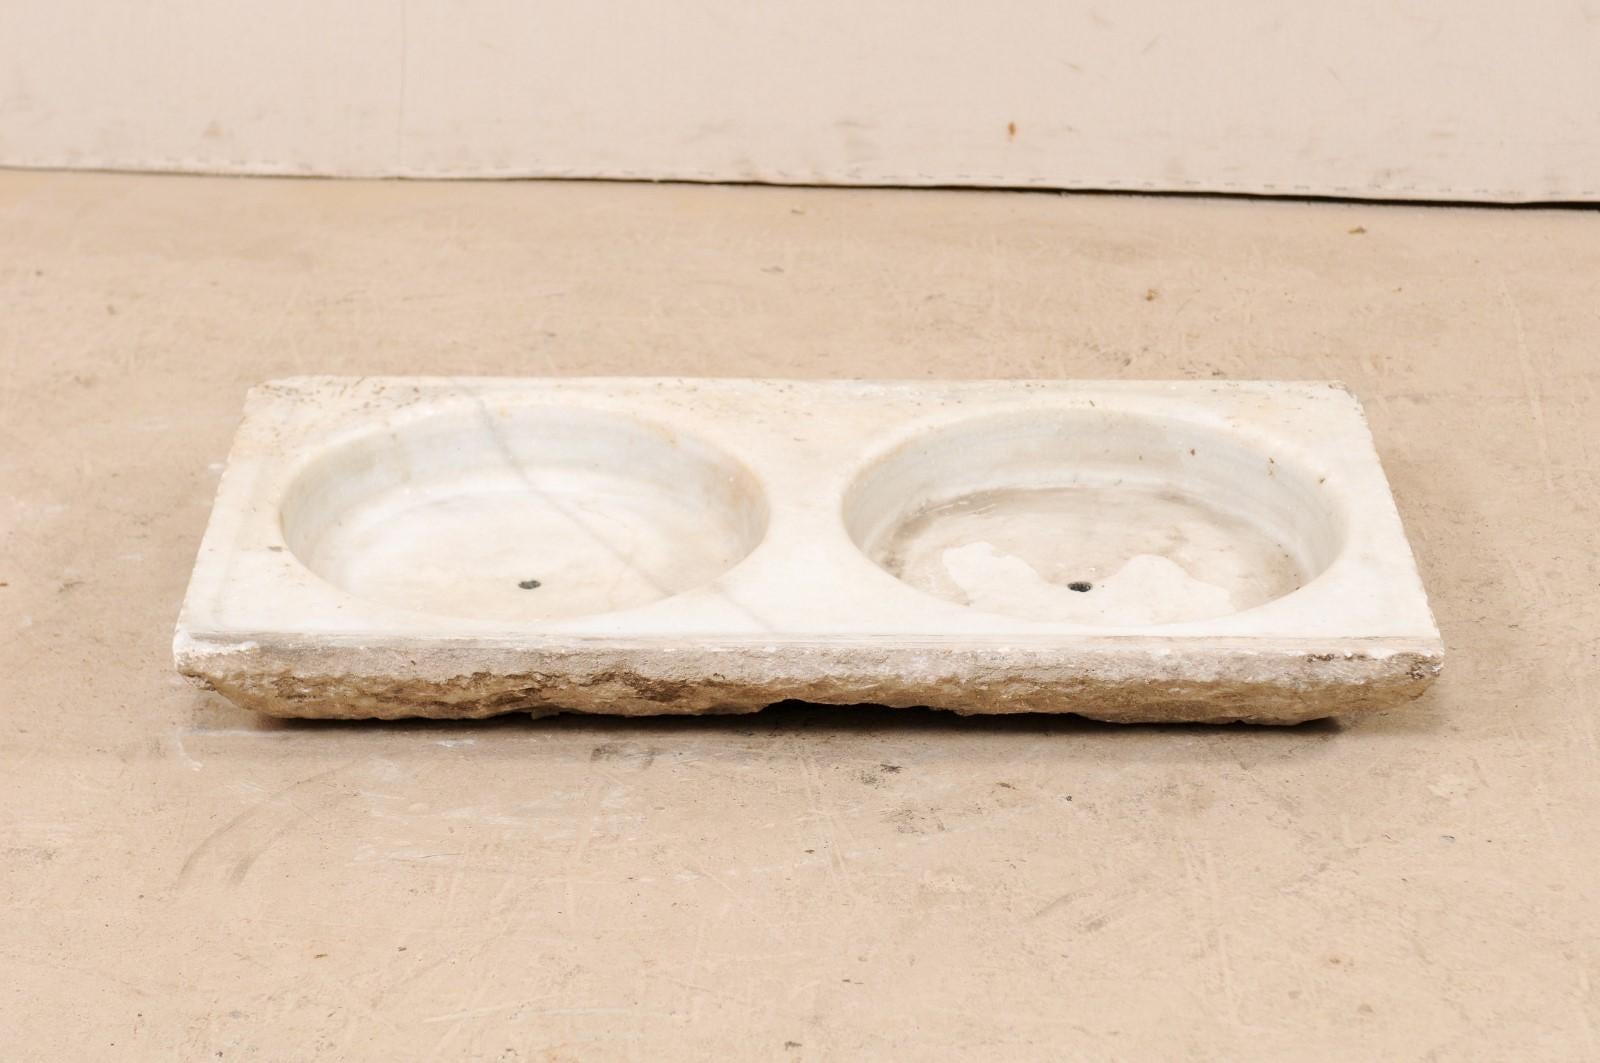 Carved French Marble 19th Century Rectangular Sink with Dual Basins